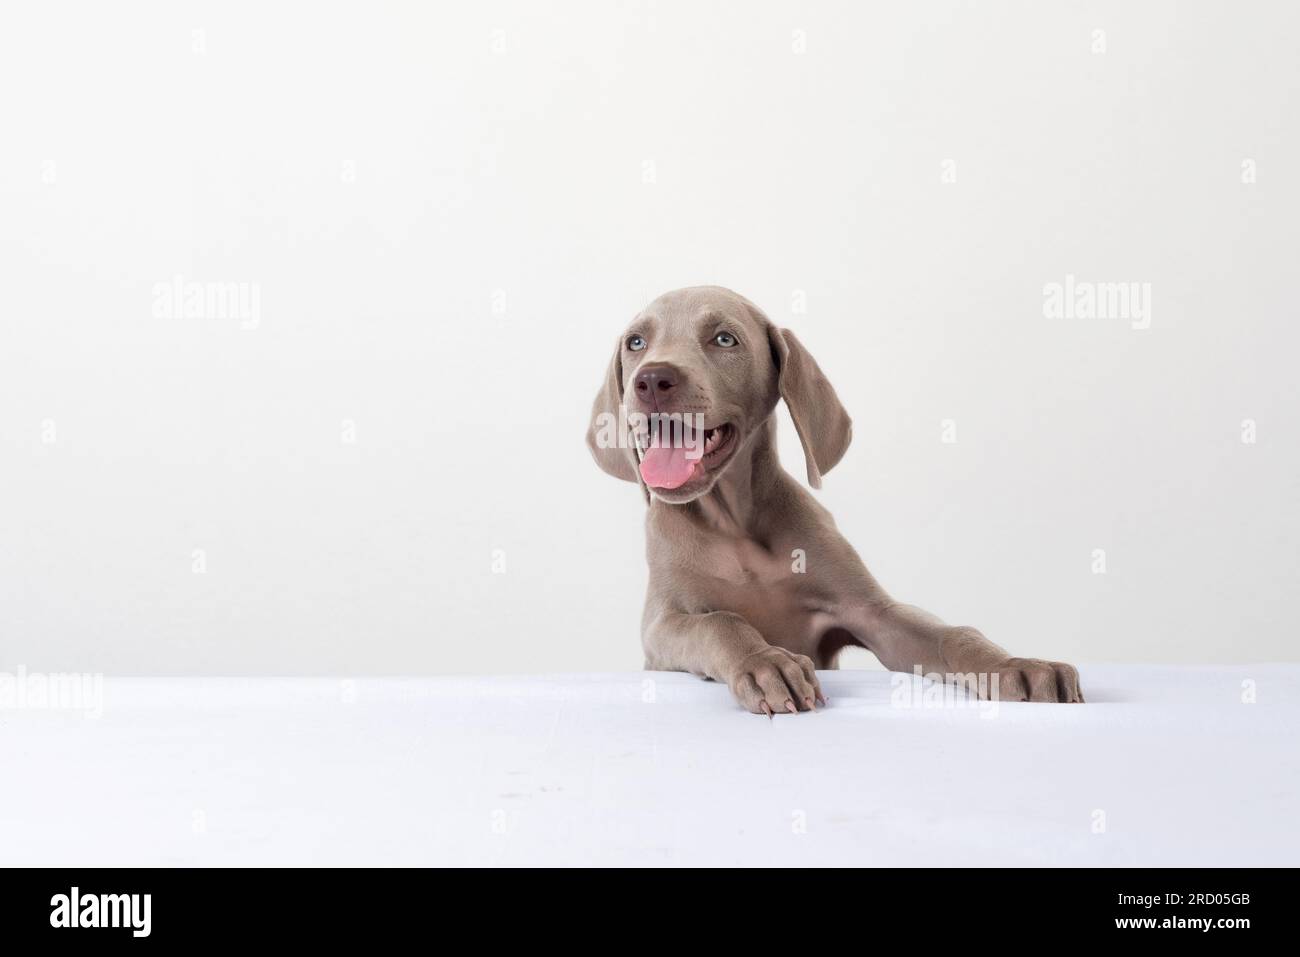 Happy Weimaraner puppy smiling with tongue out on white background. Portrait of a cute puppy Stock Photo